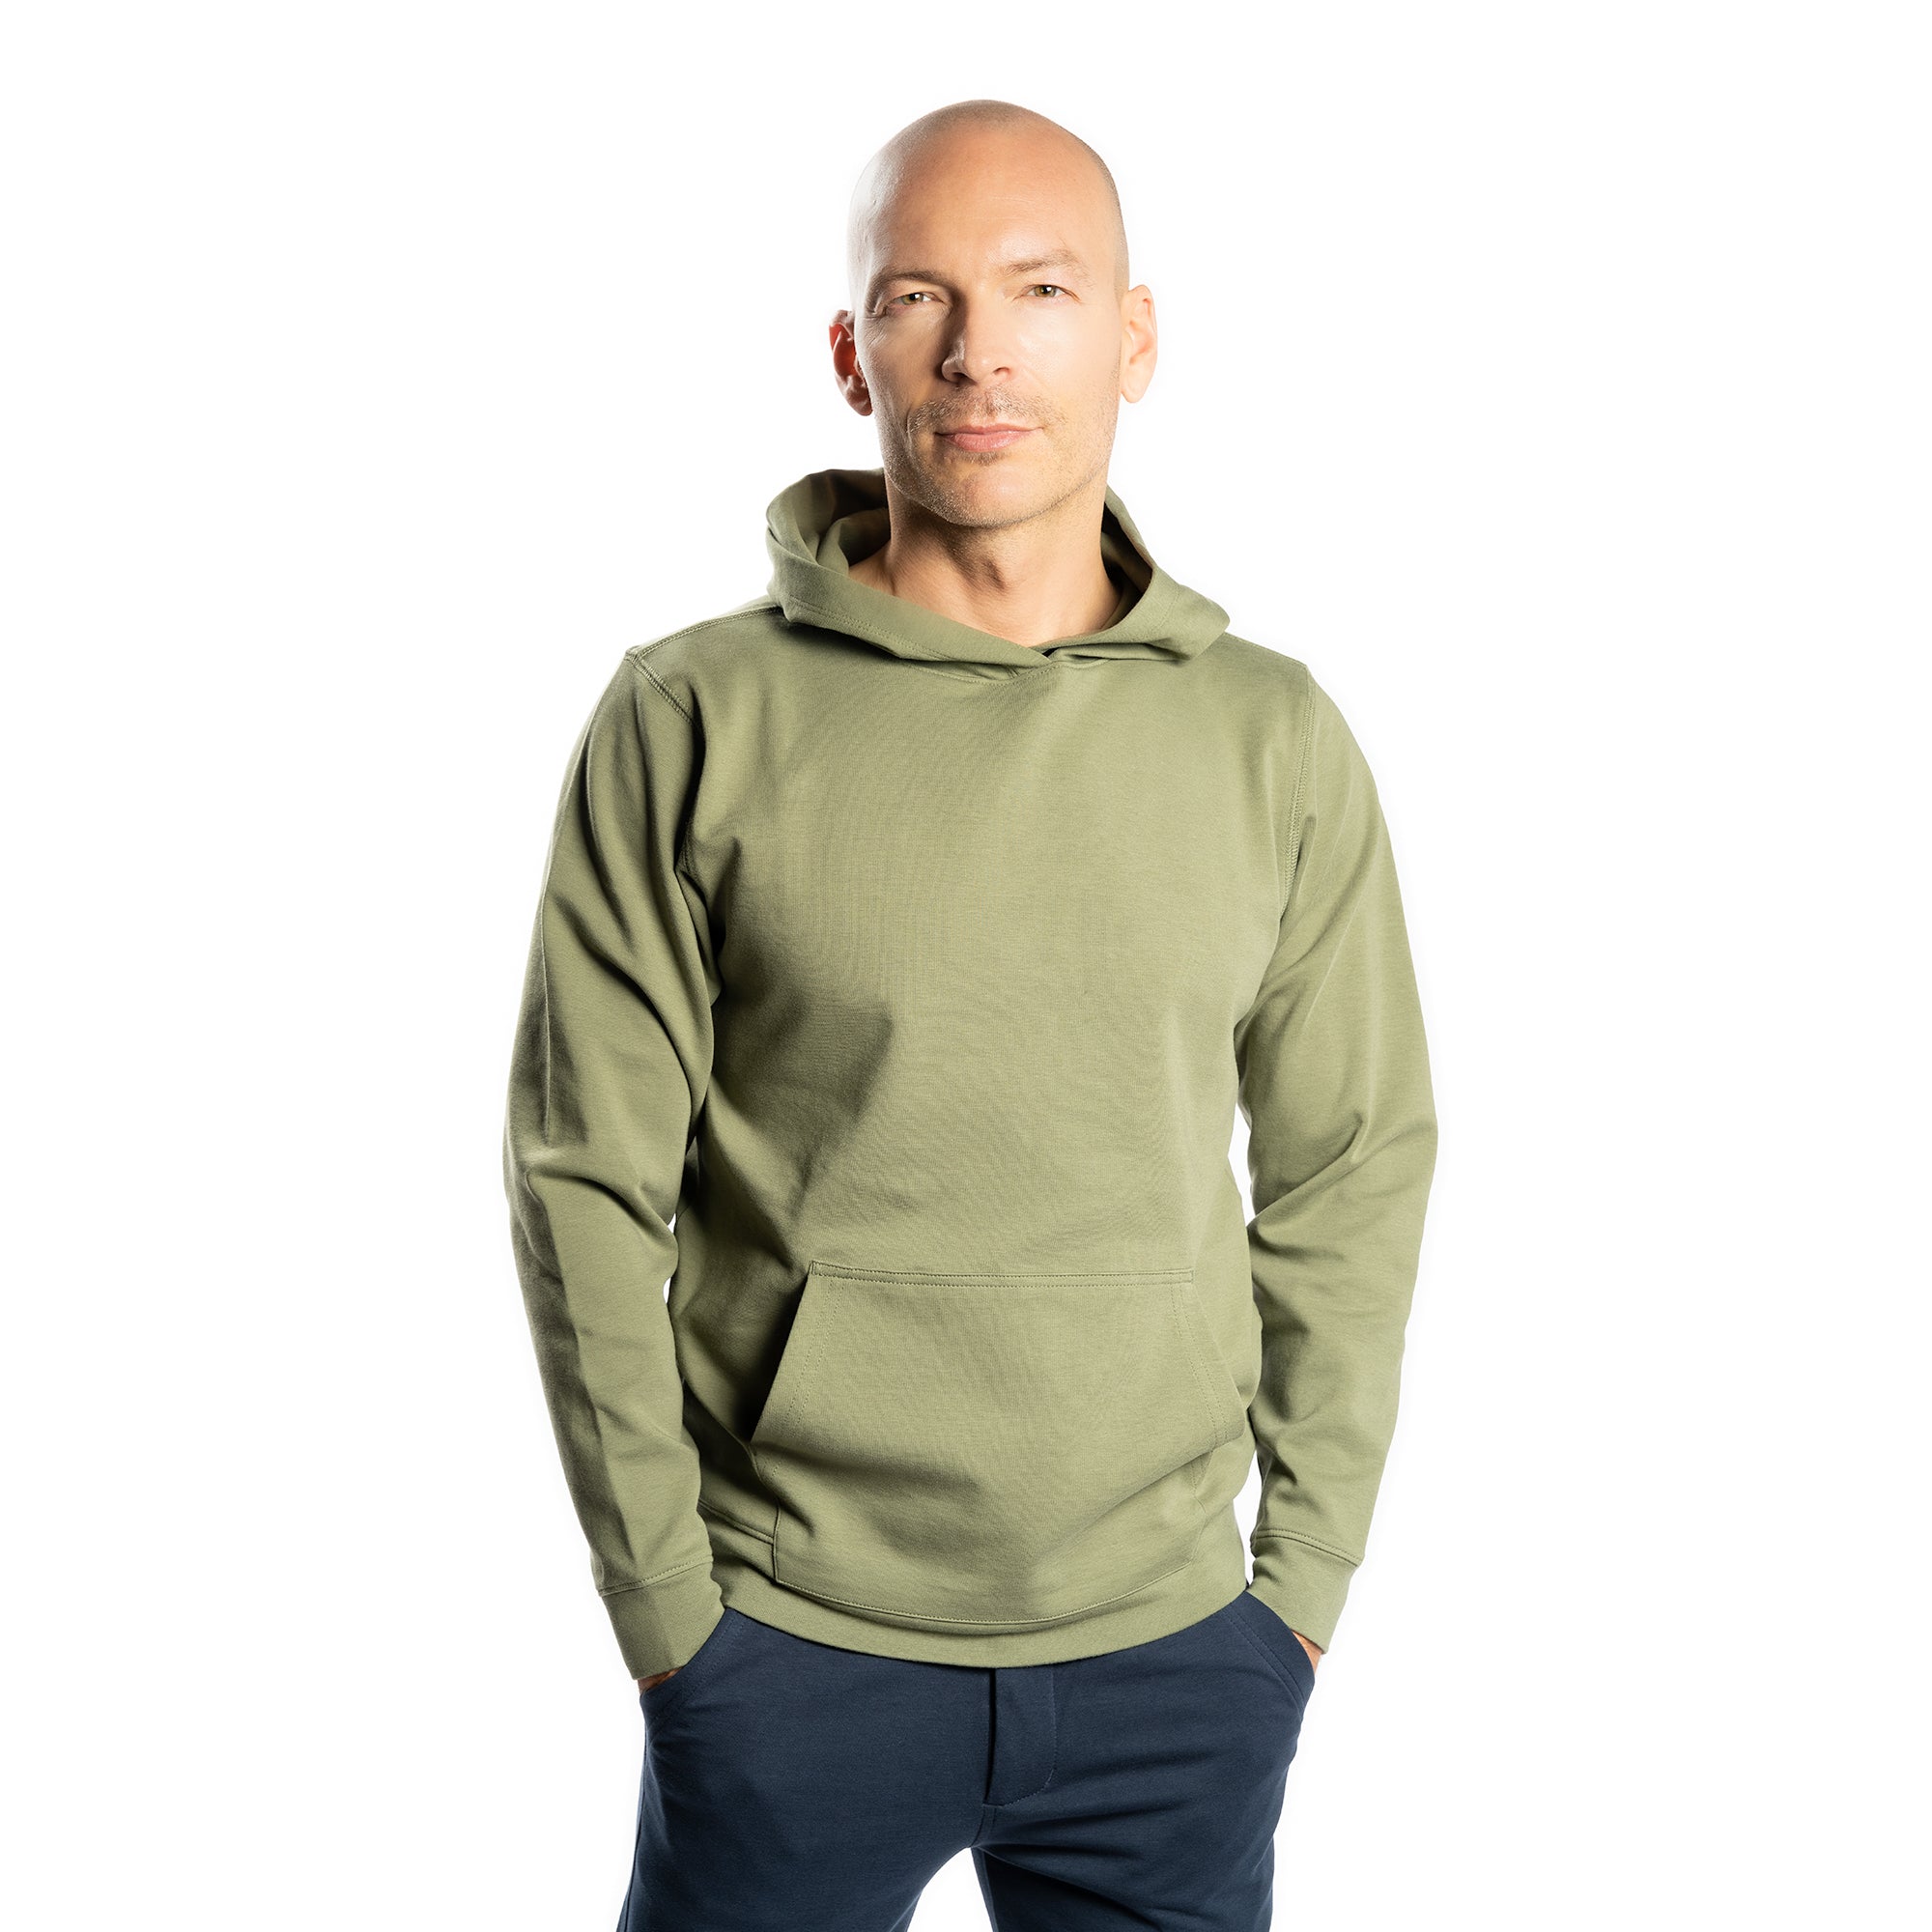 Peter Washed NYC | Olive Pullover Hoodie, Manning